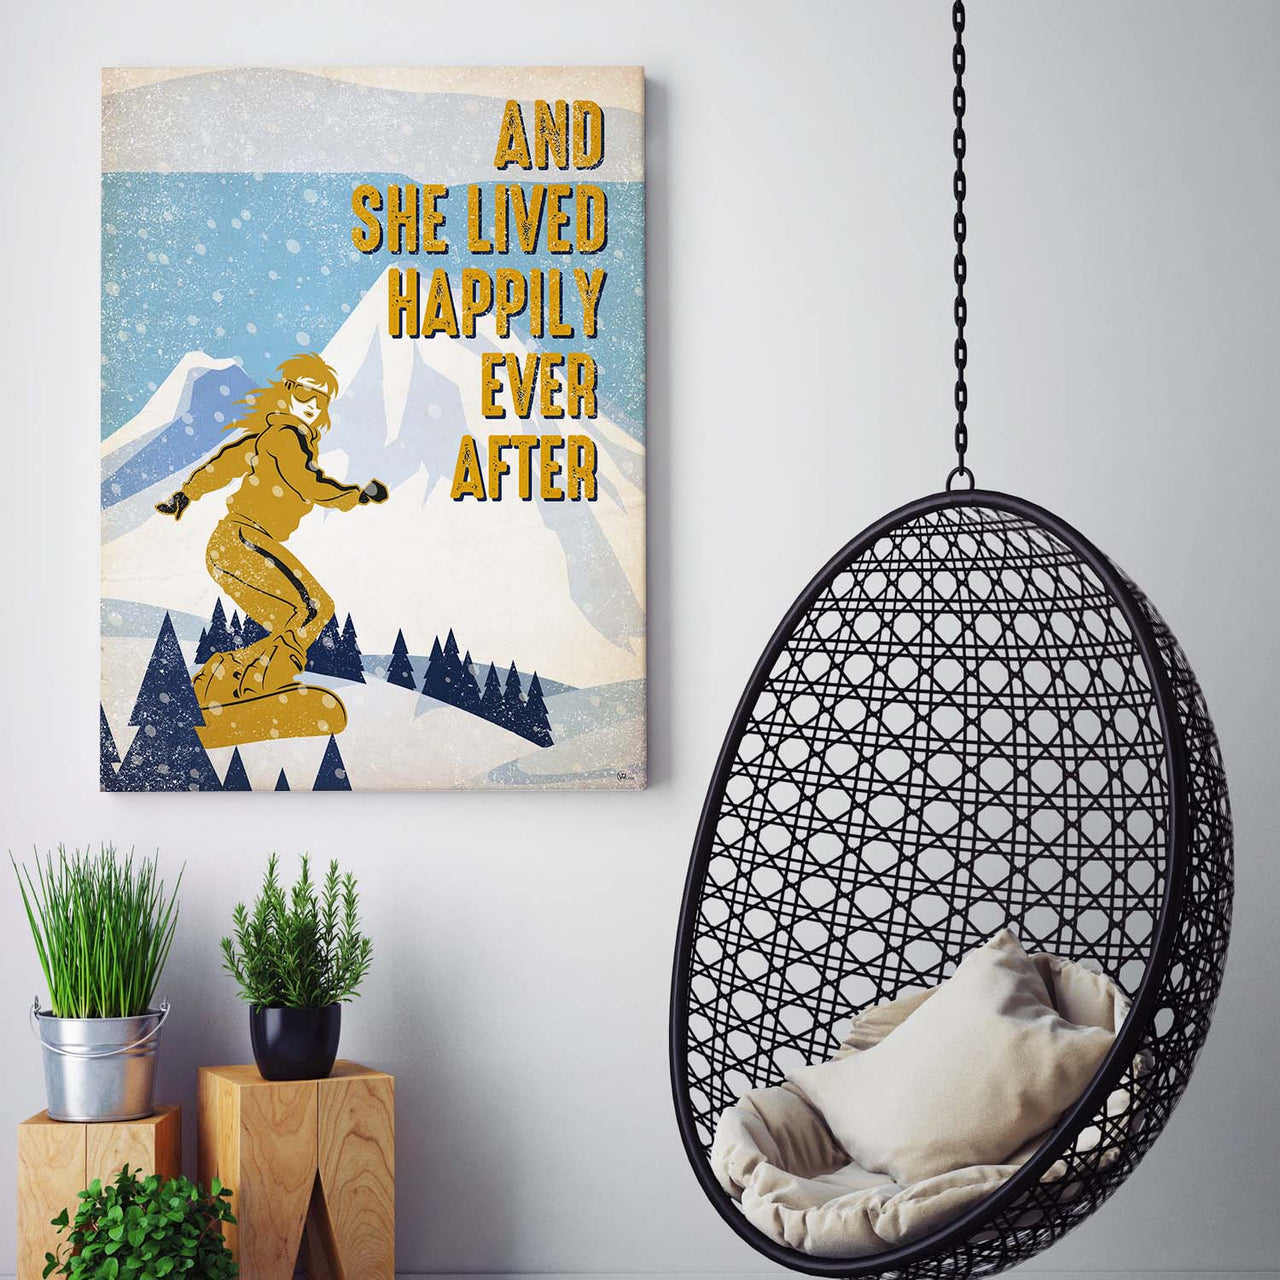 Snowboarder Snowboarding Custom Canvas Print Wall Art nd She Lived Happily Ever After Canvas Art for Girl Women